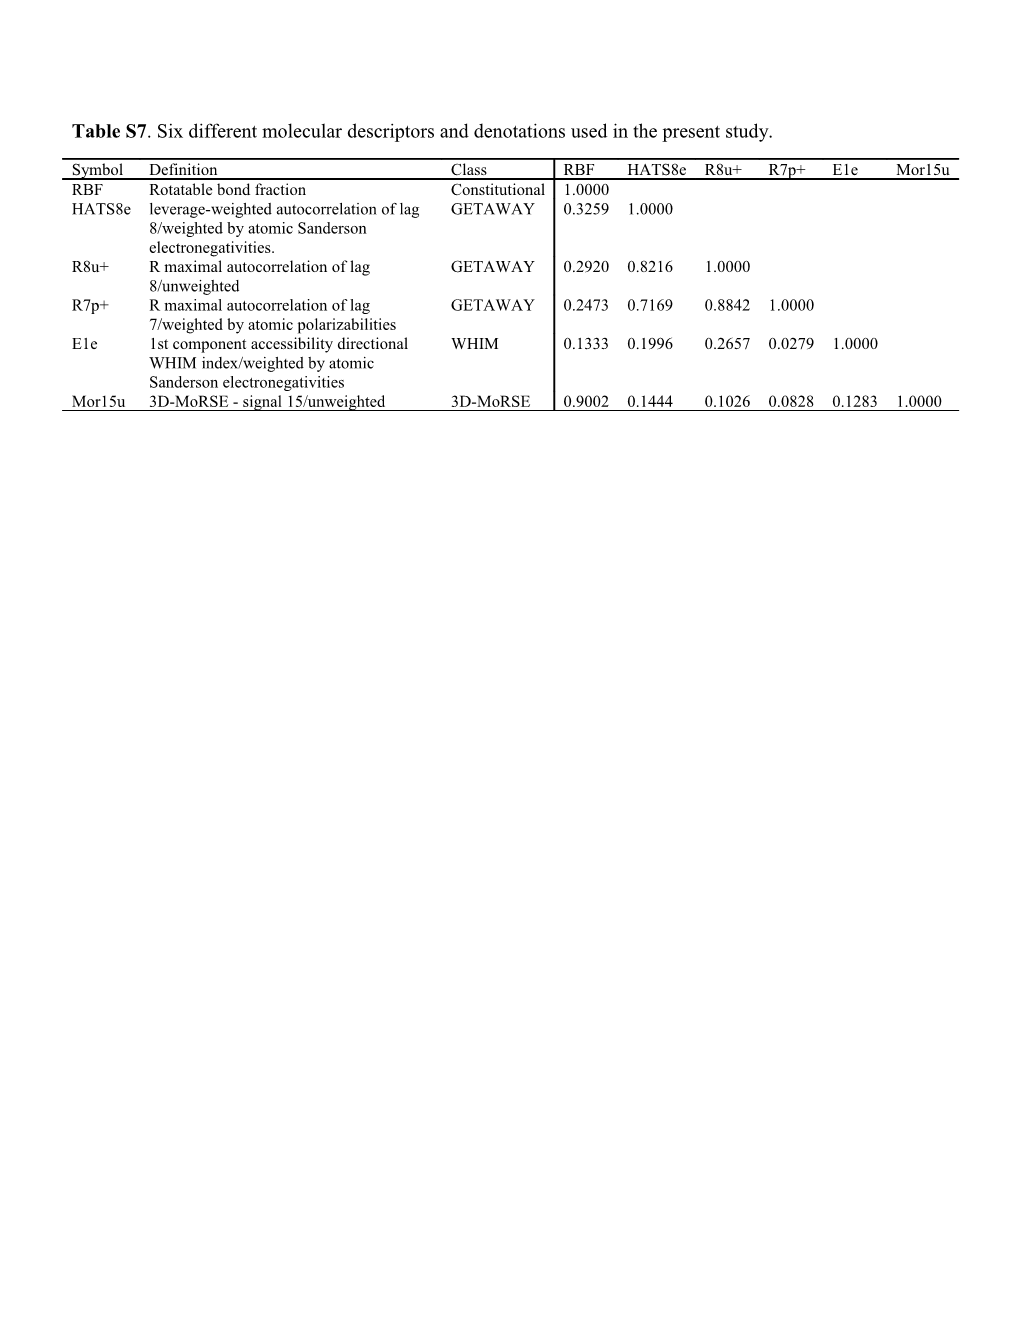 Table S7. Six Different Molecular Descriptors and Denotations Used in the Present Study